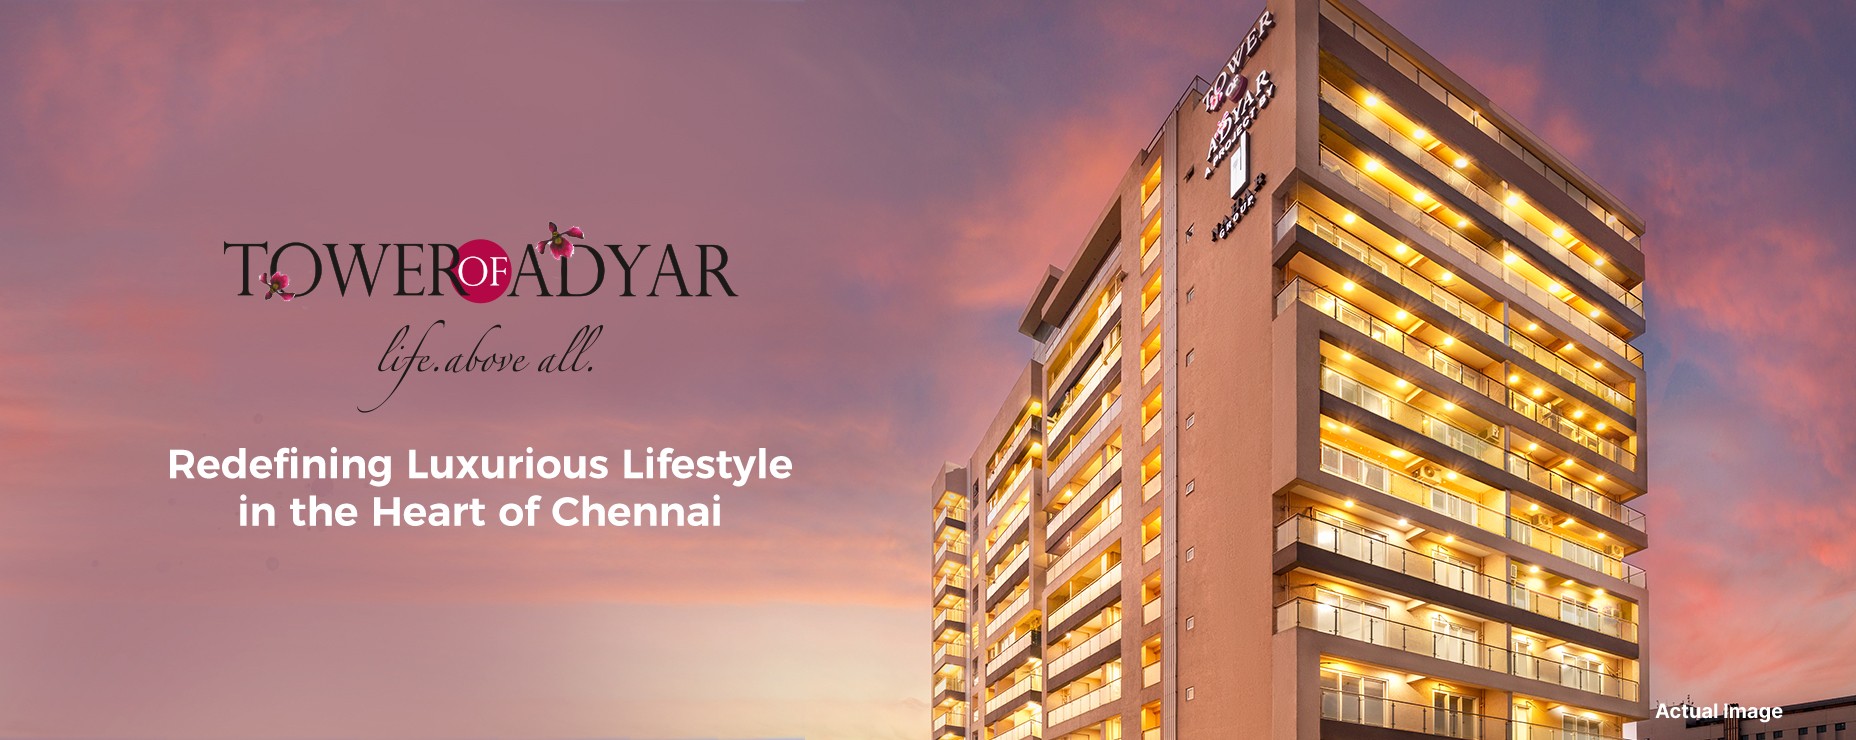 Luxury Lifestyle in the Heart of Chennai - Tower of Adyar - Nahar Group